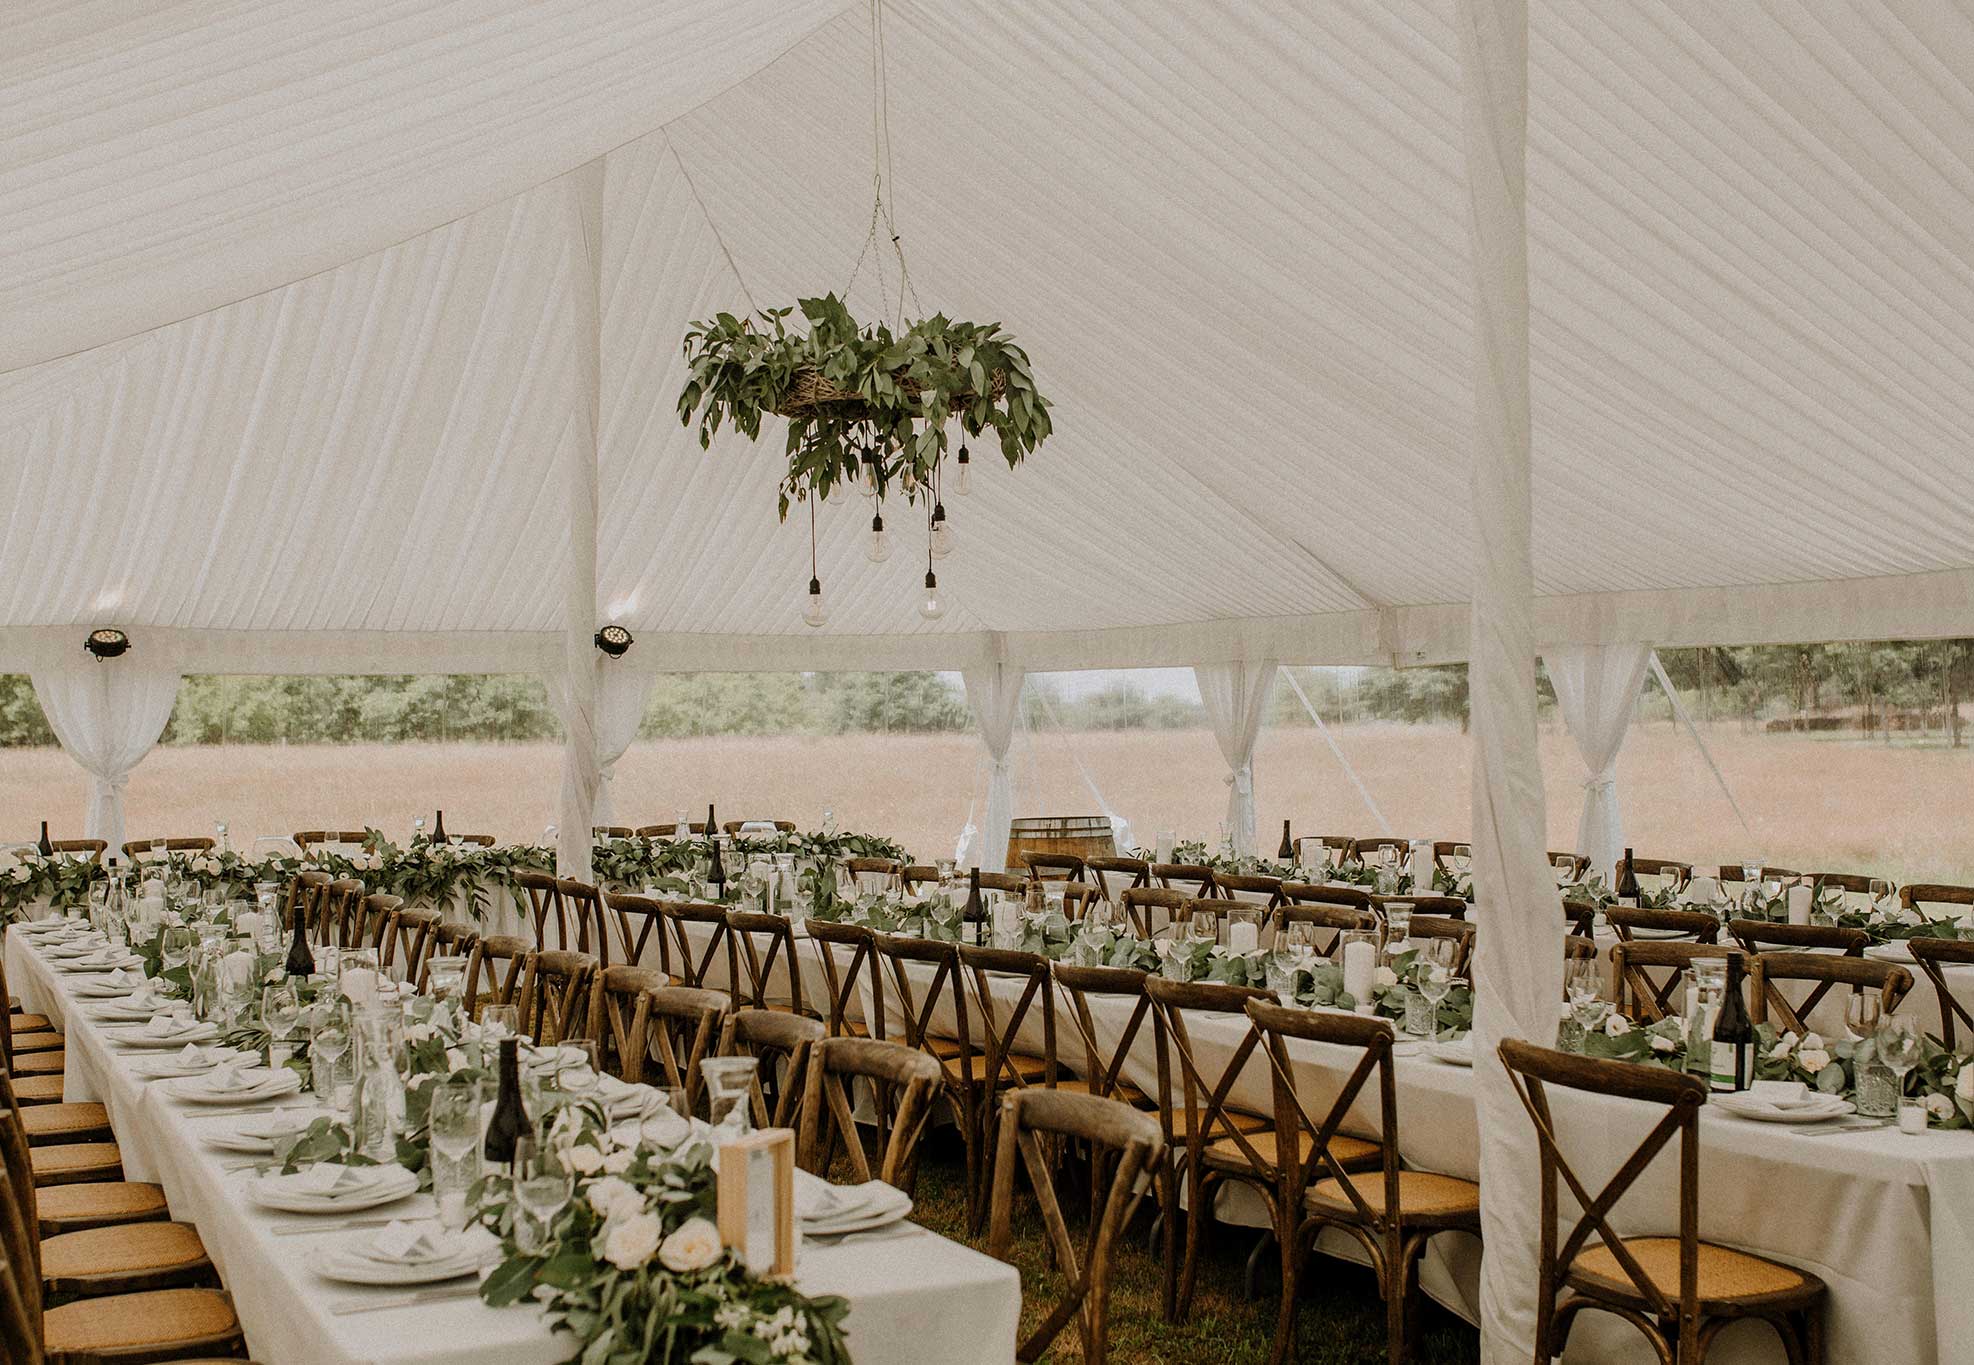 silk-estate-marquee-weddings-and-events-styling-and-hire-lightting-festoon-12